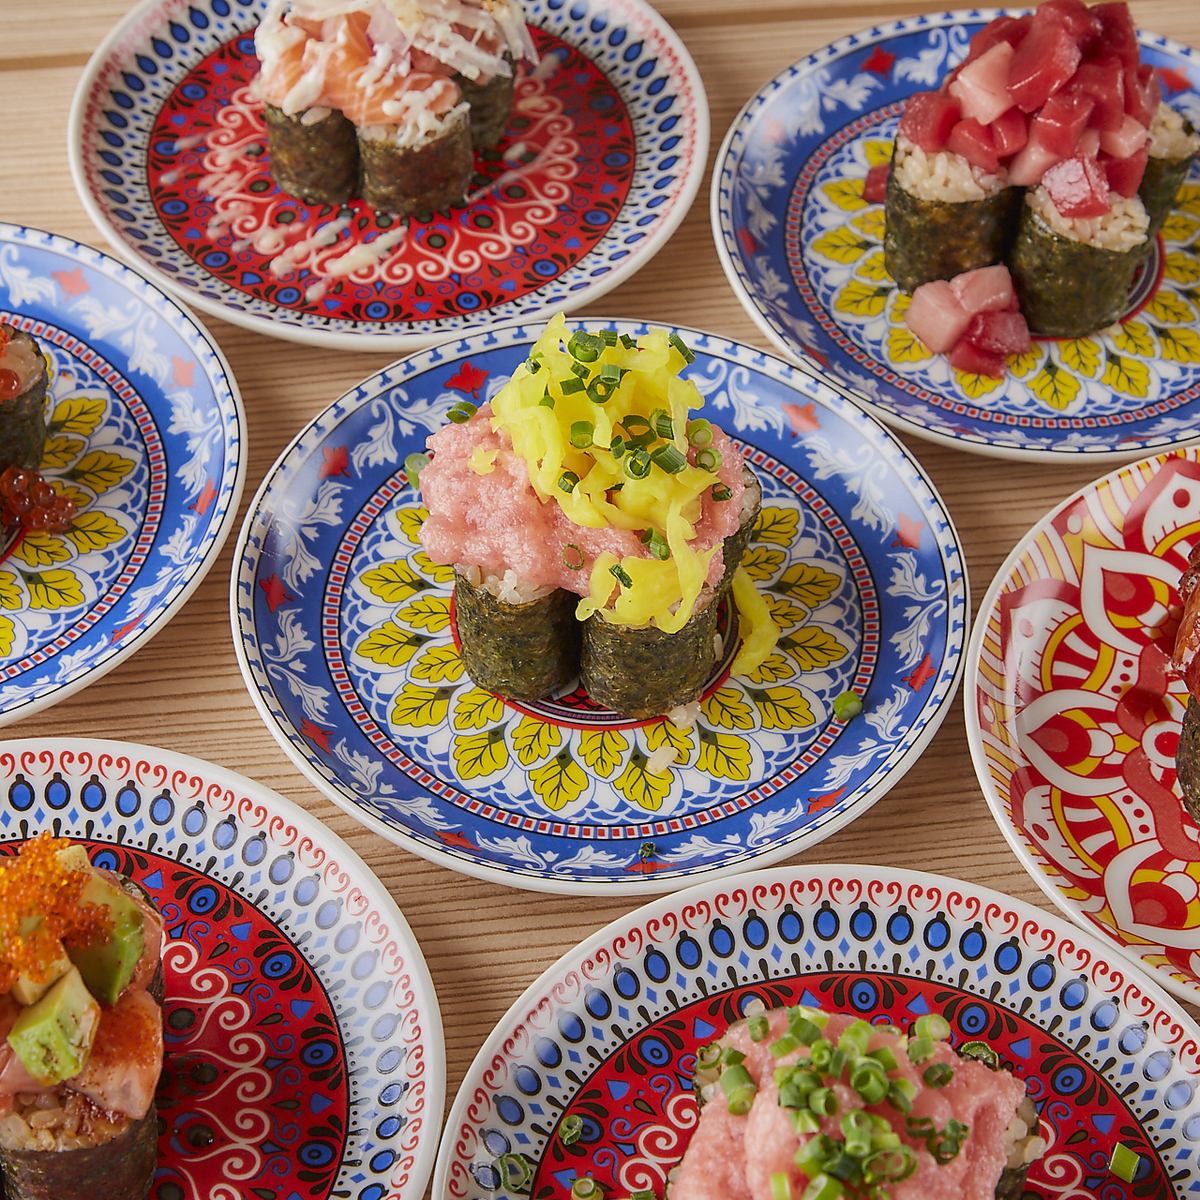 An authentic sushi bar run by a former chef has landed in Hakata for the first time!!